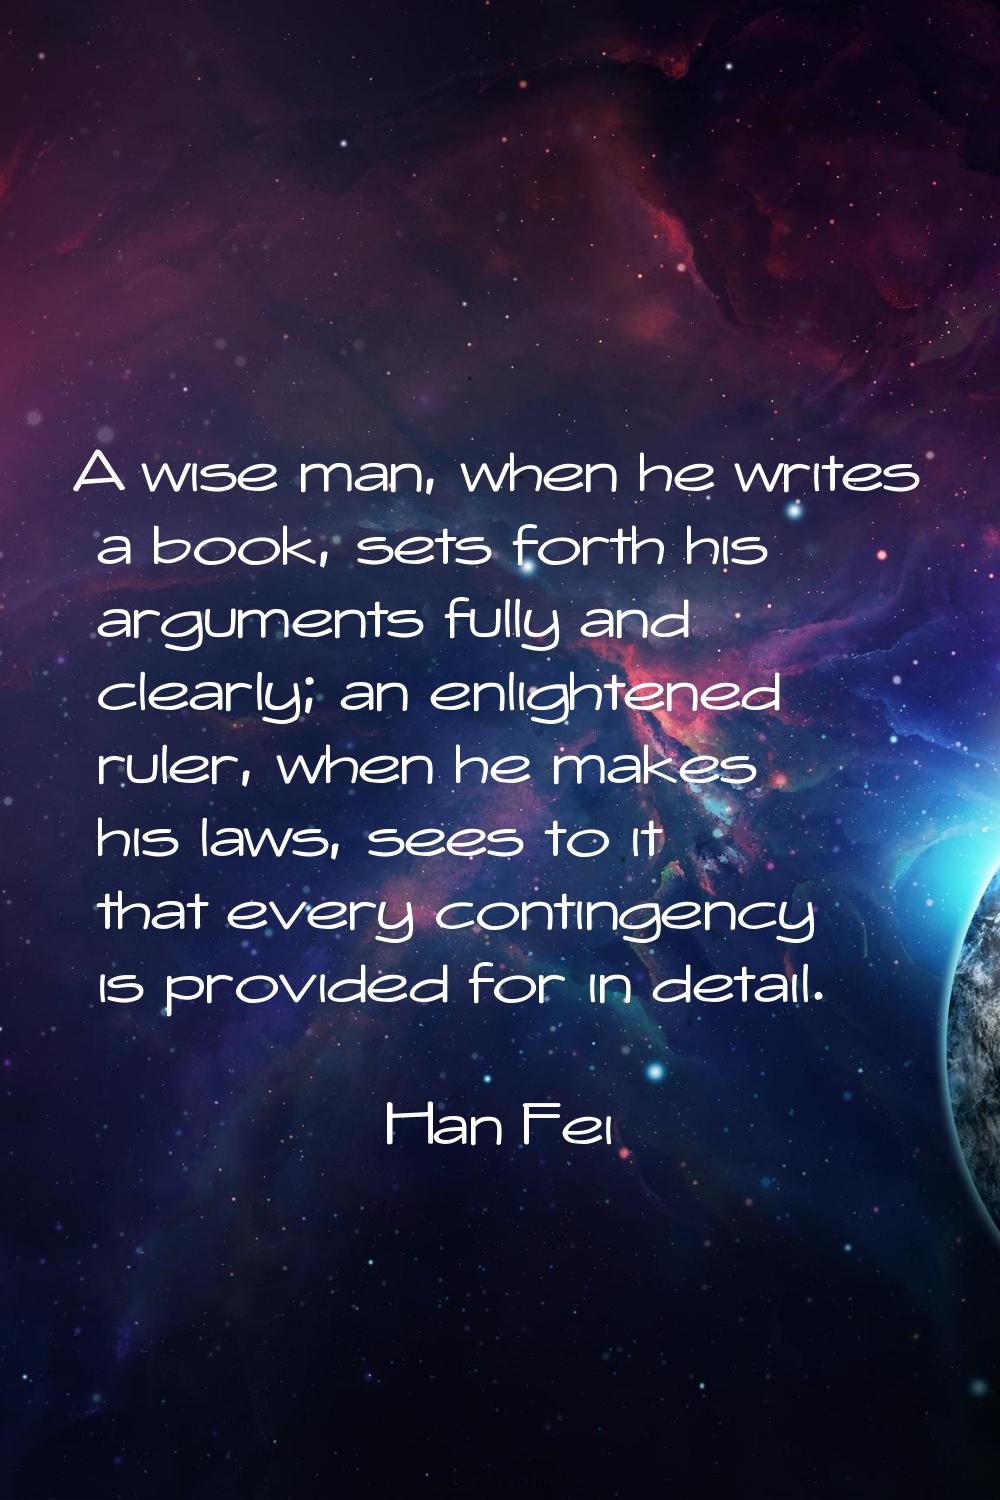 A wise man, when he writes a book, sets forth his arguments fully and clearly; an enlightened ruler